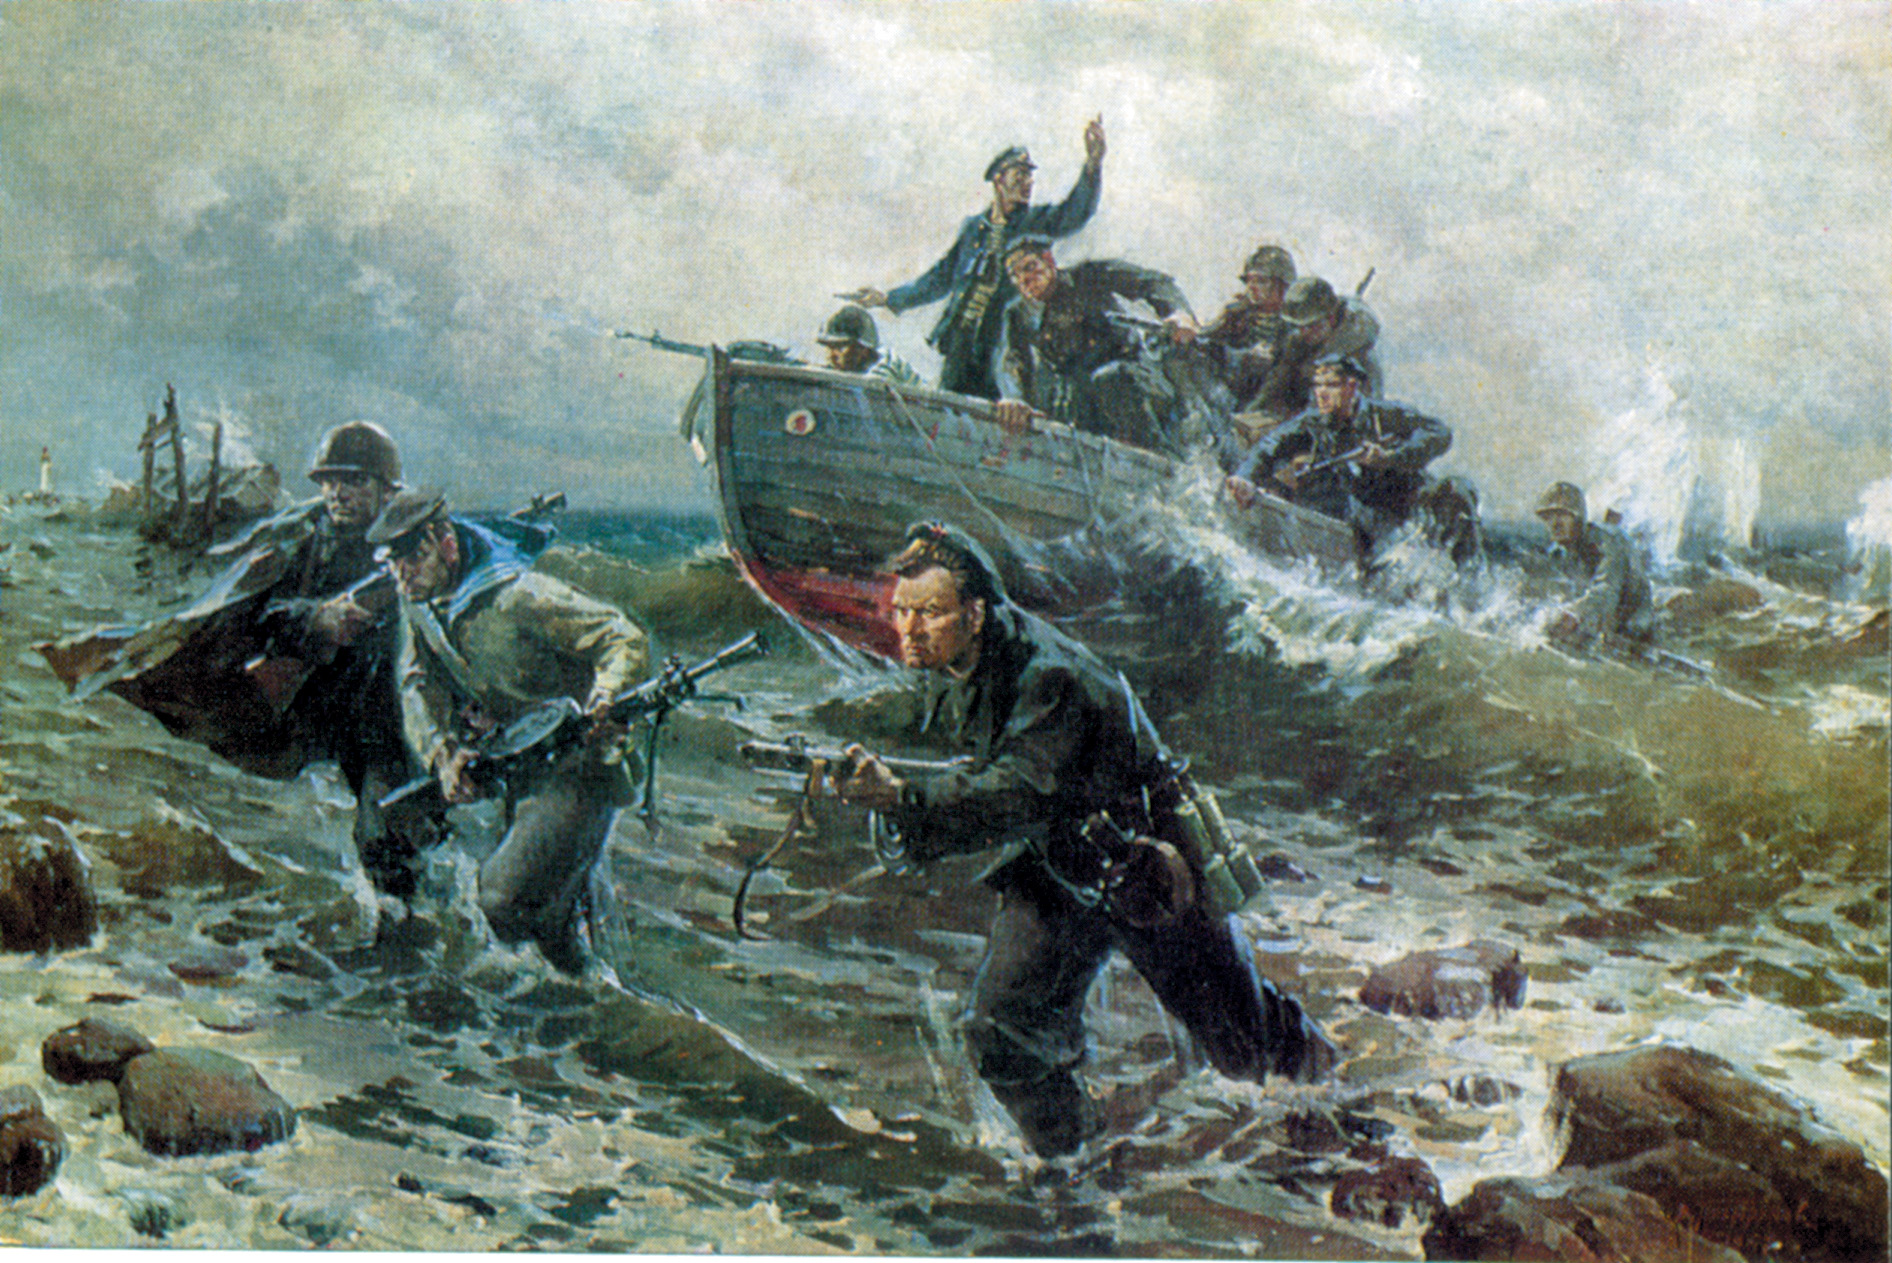 In a somewhat romanticized painting by Viktor G. Puzirkov, Soviet marines storm ashore from landing craft. The Soviet Navy contributed 30 brigades of fighting troops to the effort to repel the Nazis during World War II.